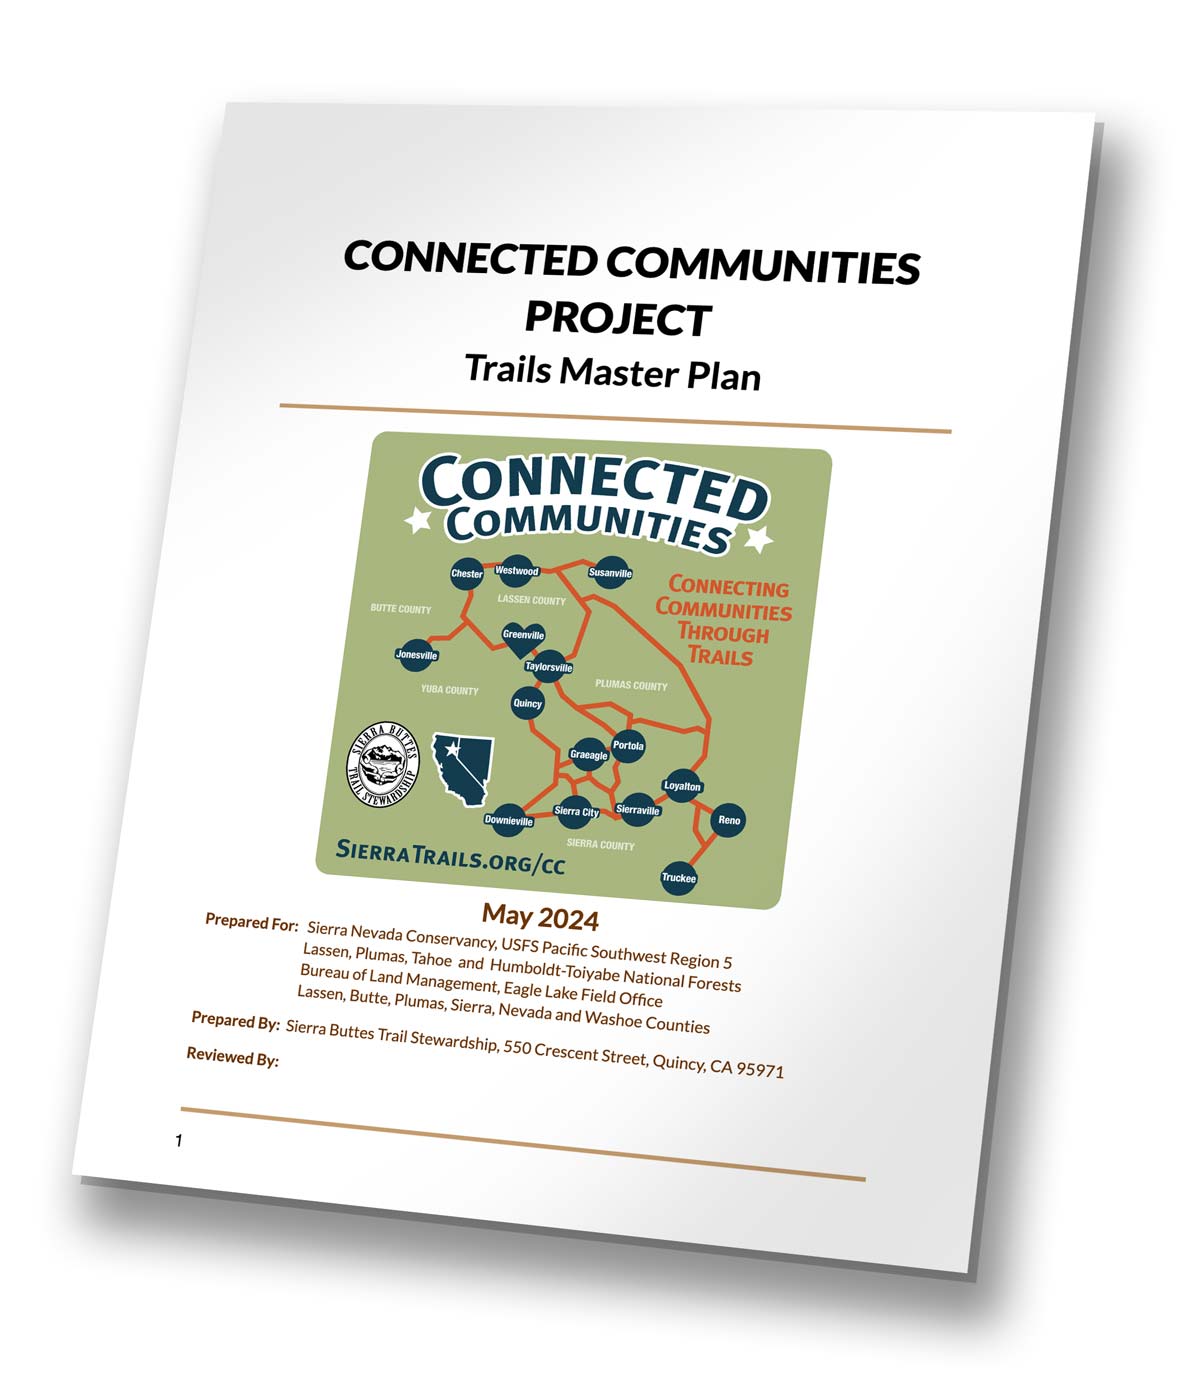 Connected Communities draft trails master plan